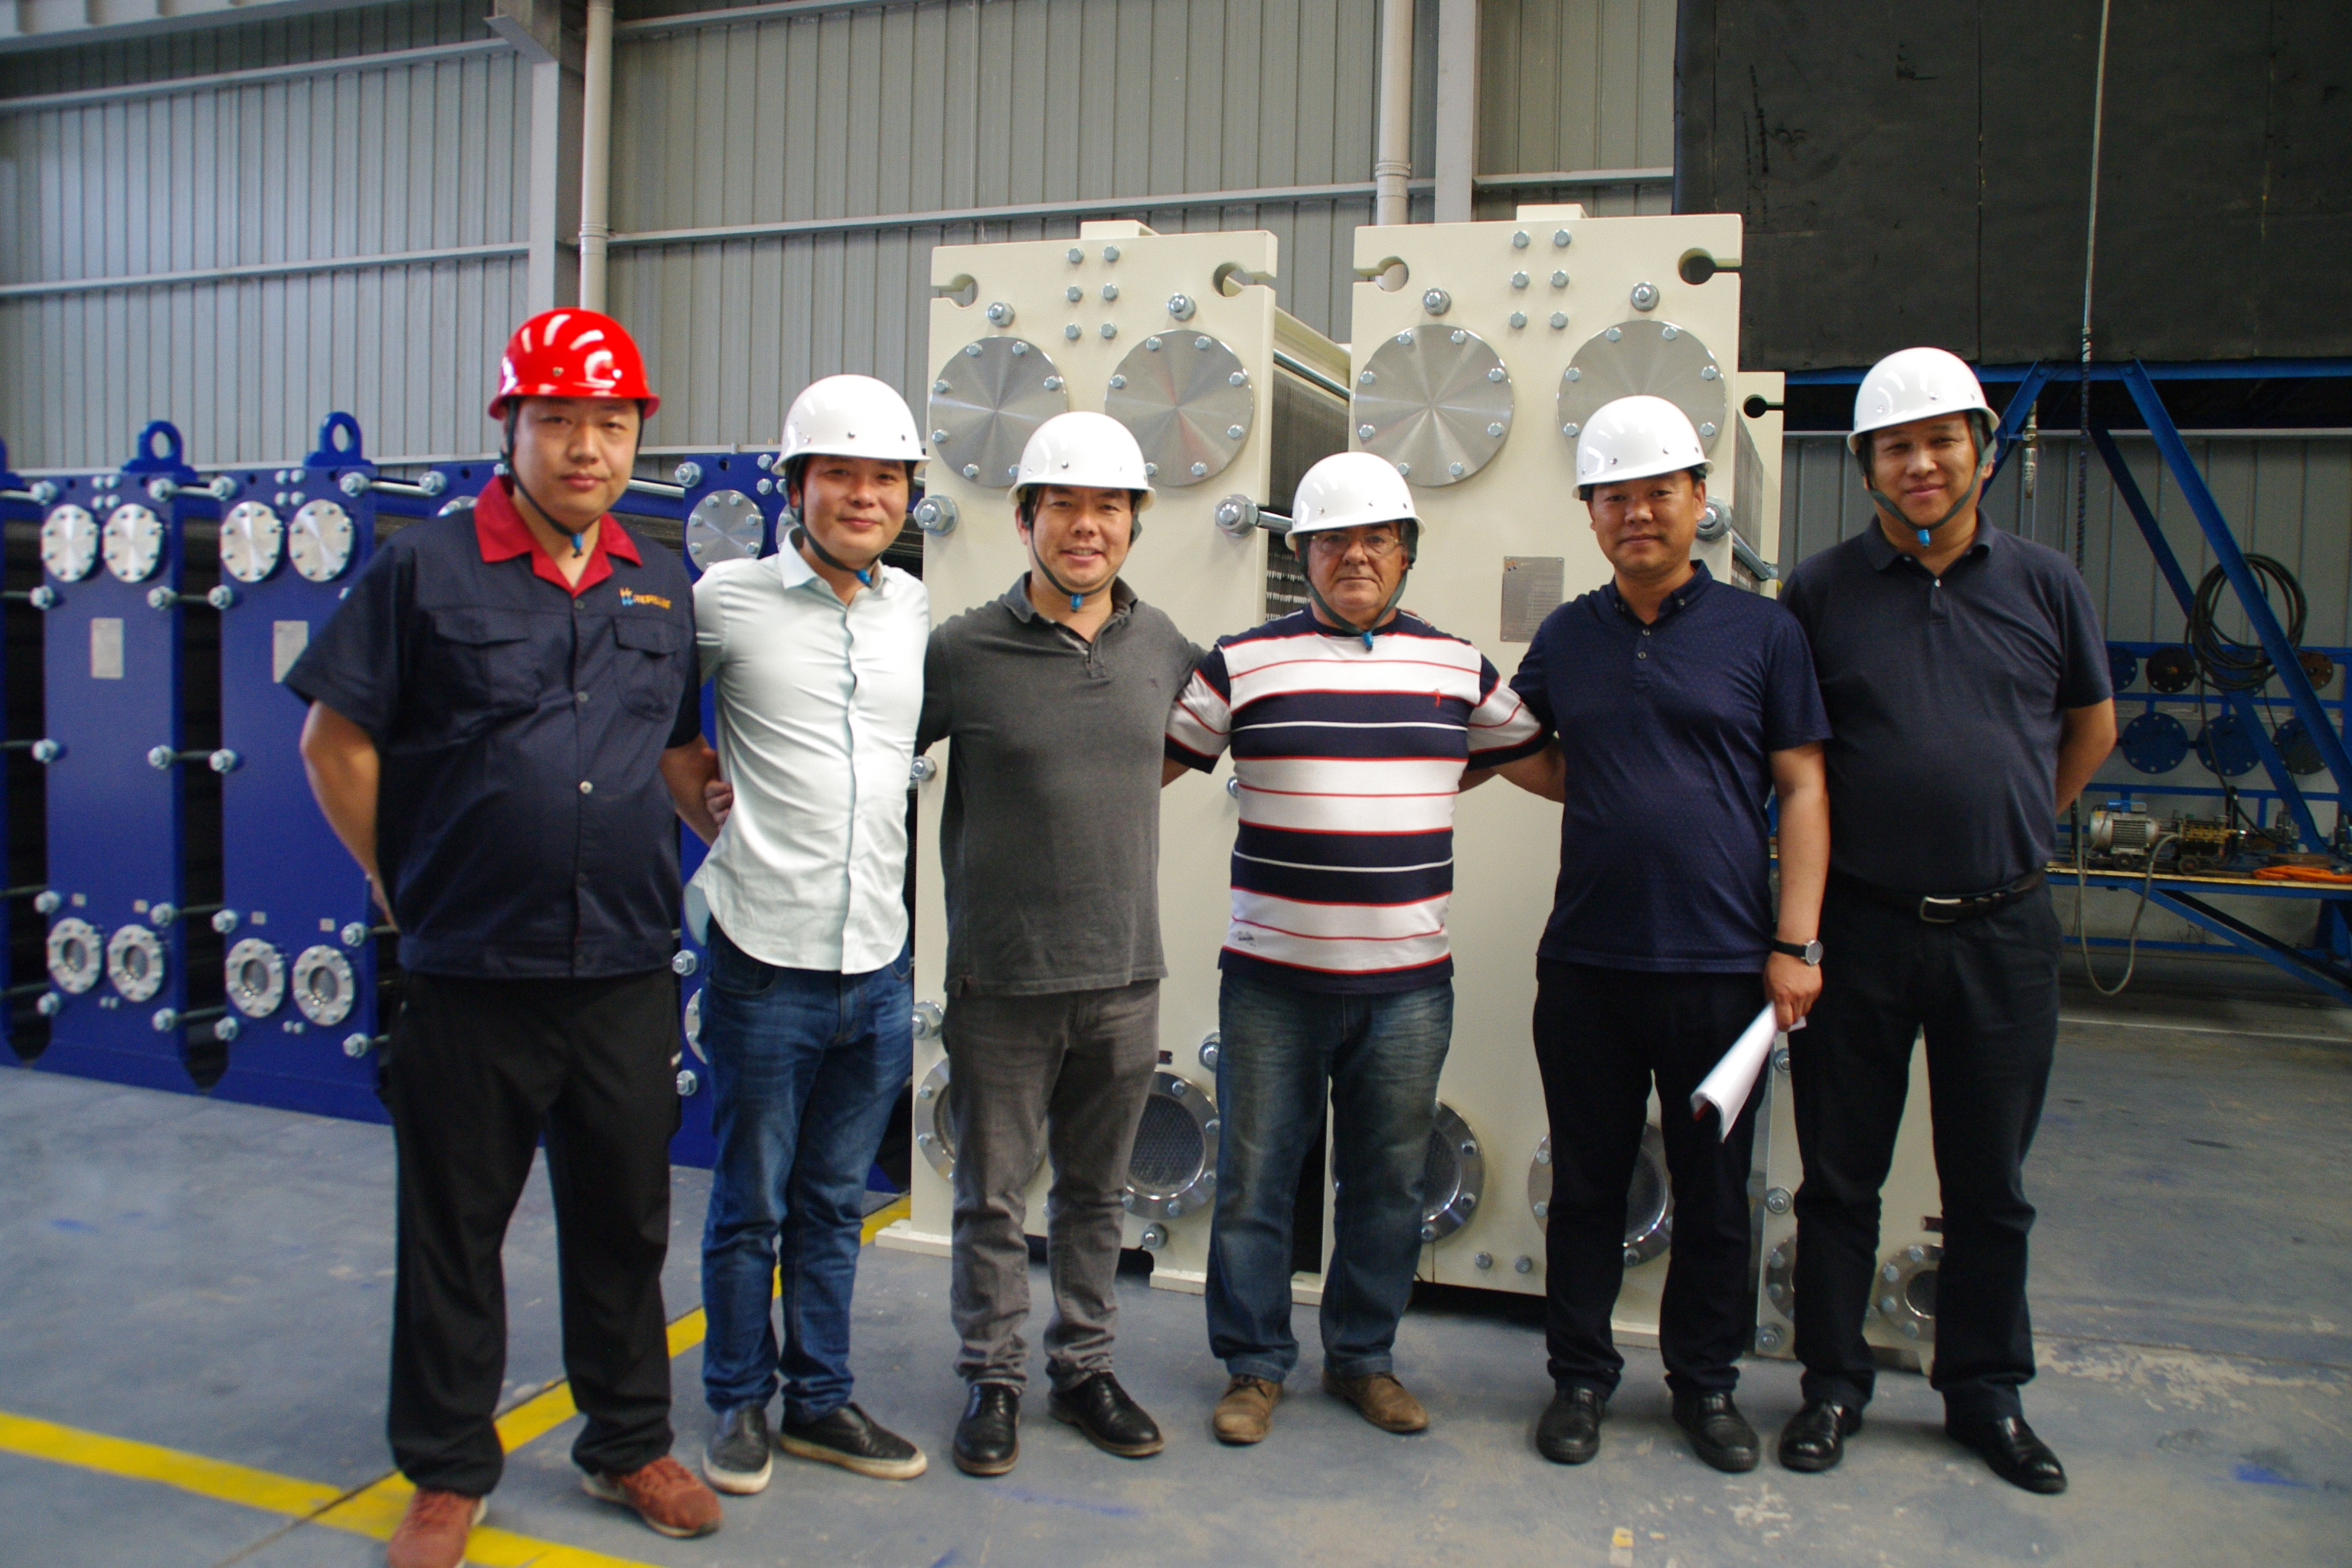 The Brazil clients had an inspection in our Beijing factory